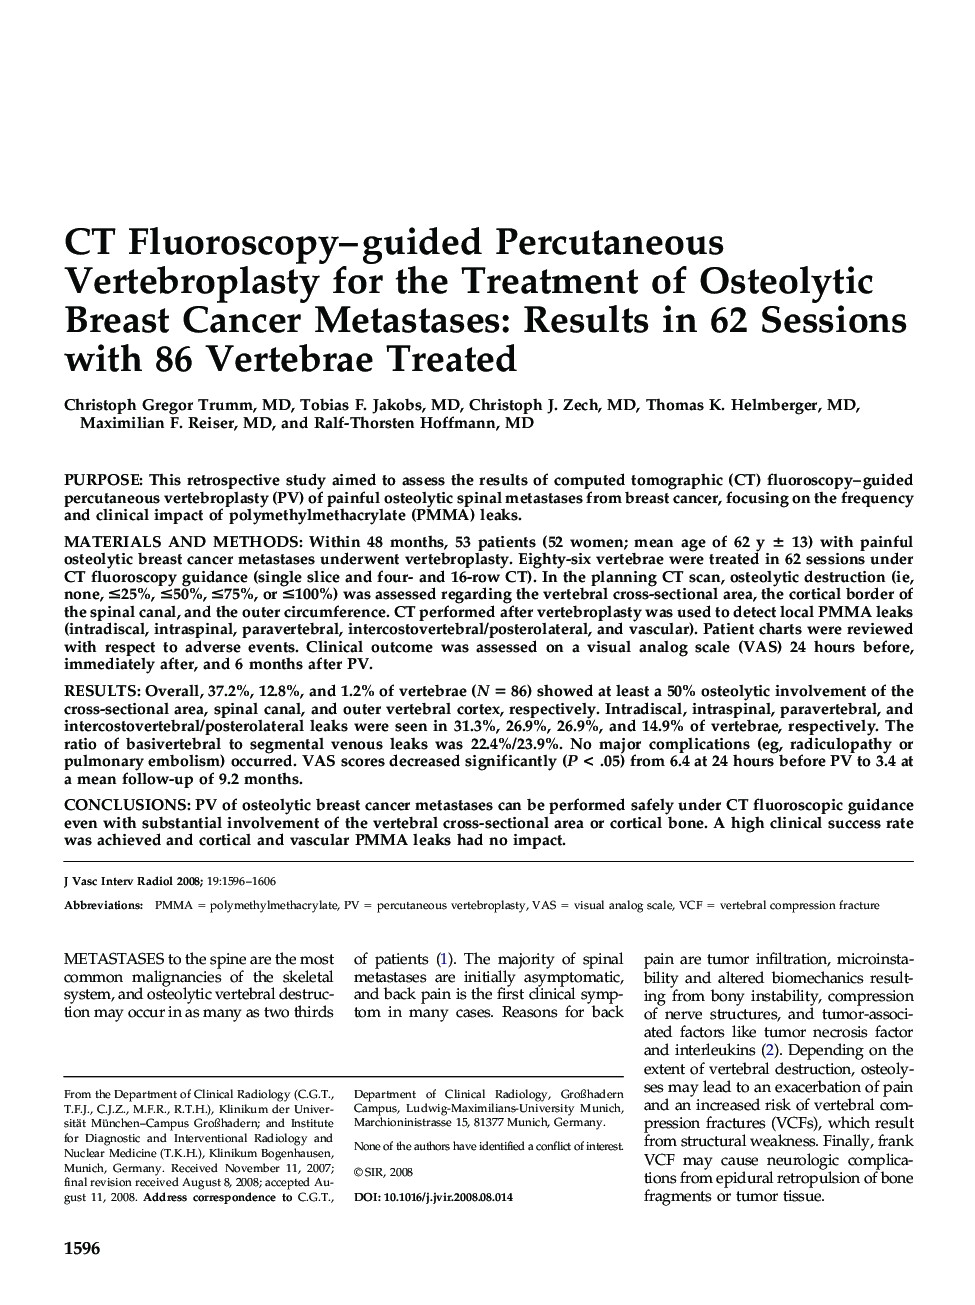 CT Fluoroscopy-guided Percutaneous Vertebroplasty for the Treatment of Osteolytic Breast Cancer Metastases: Results in 62 Sessions with 86 Vertebrae Treated